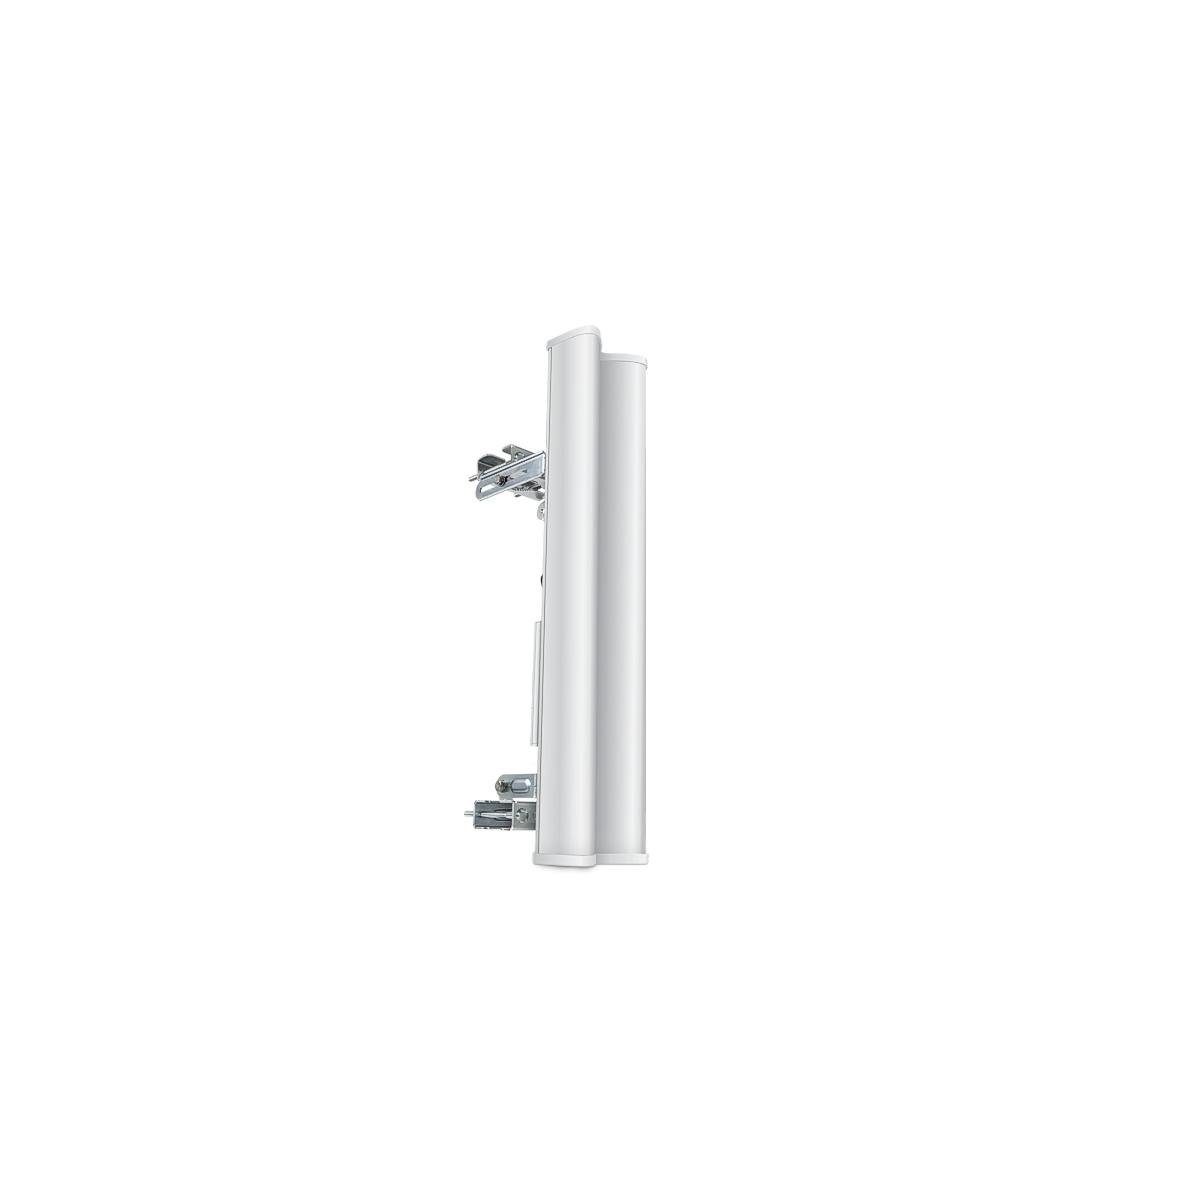 Ubiquiti Networks AM-2G15-120 - 2.4 GHz 2x2 MIMO BaseStation-Antenne WLAN-Antenne